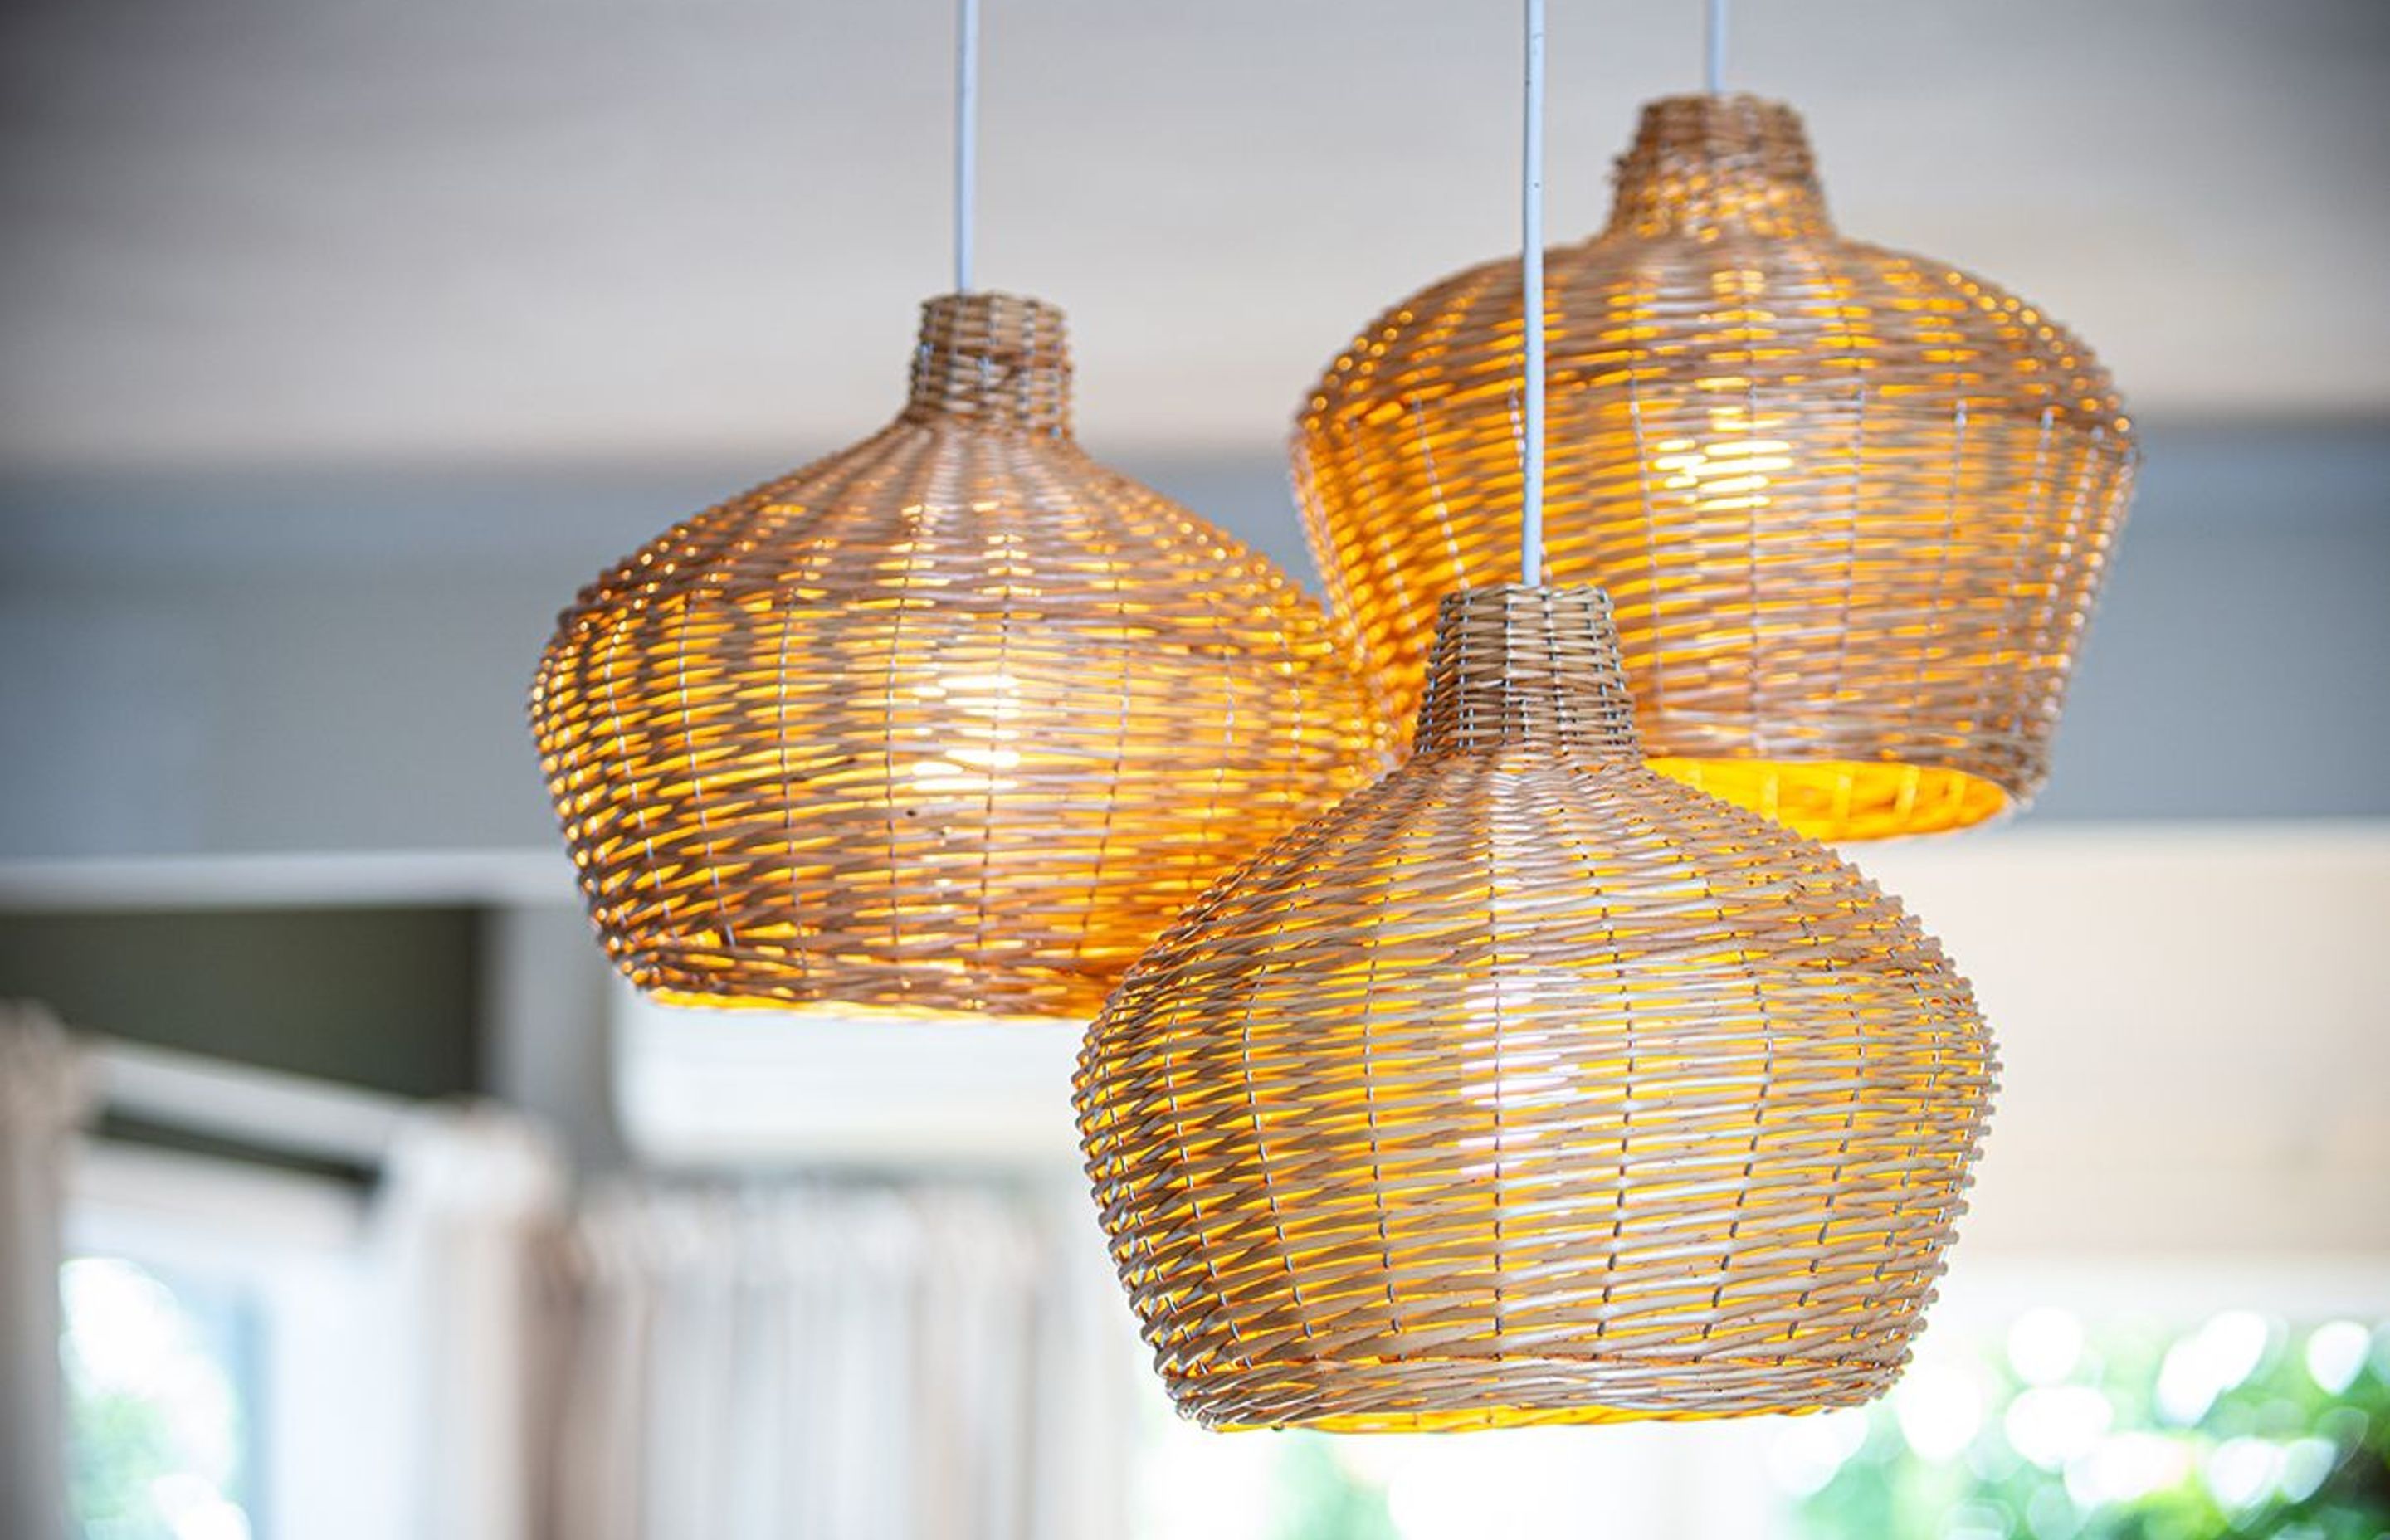 Simple basket-weave light shades and to the crafted feel of this home.